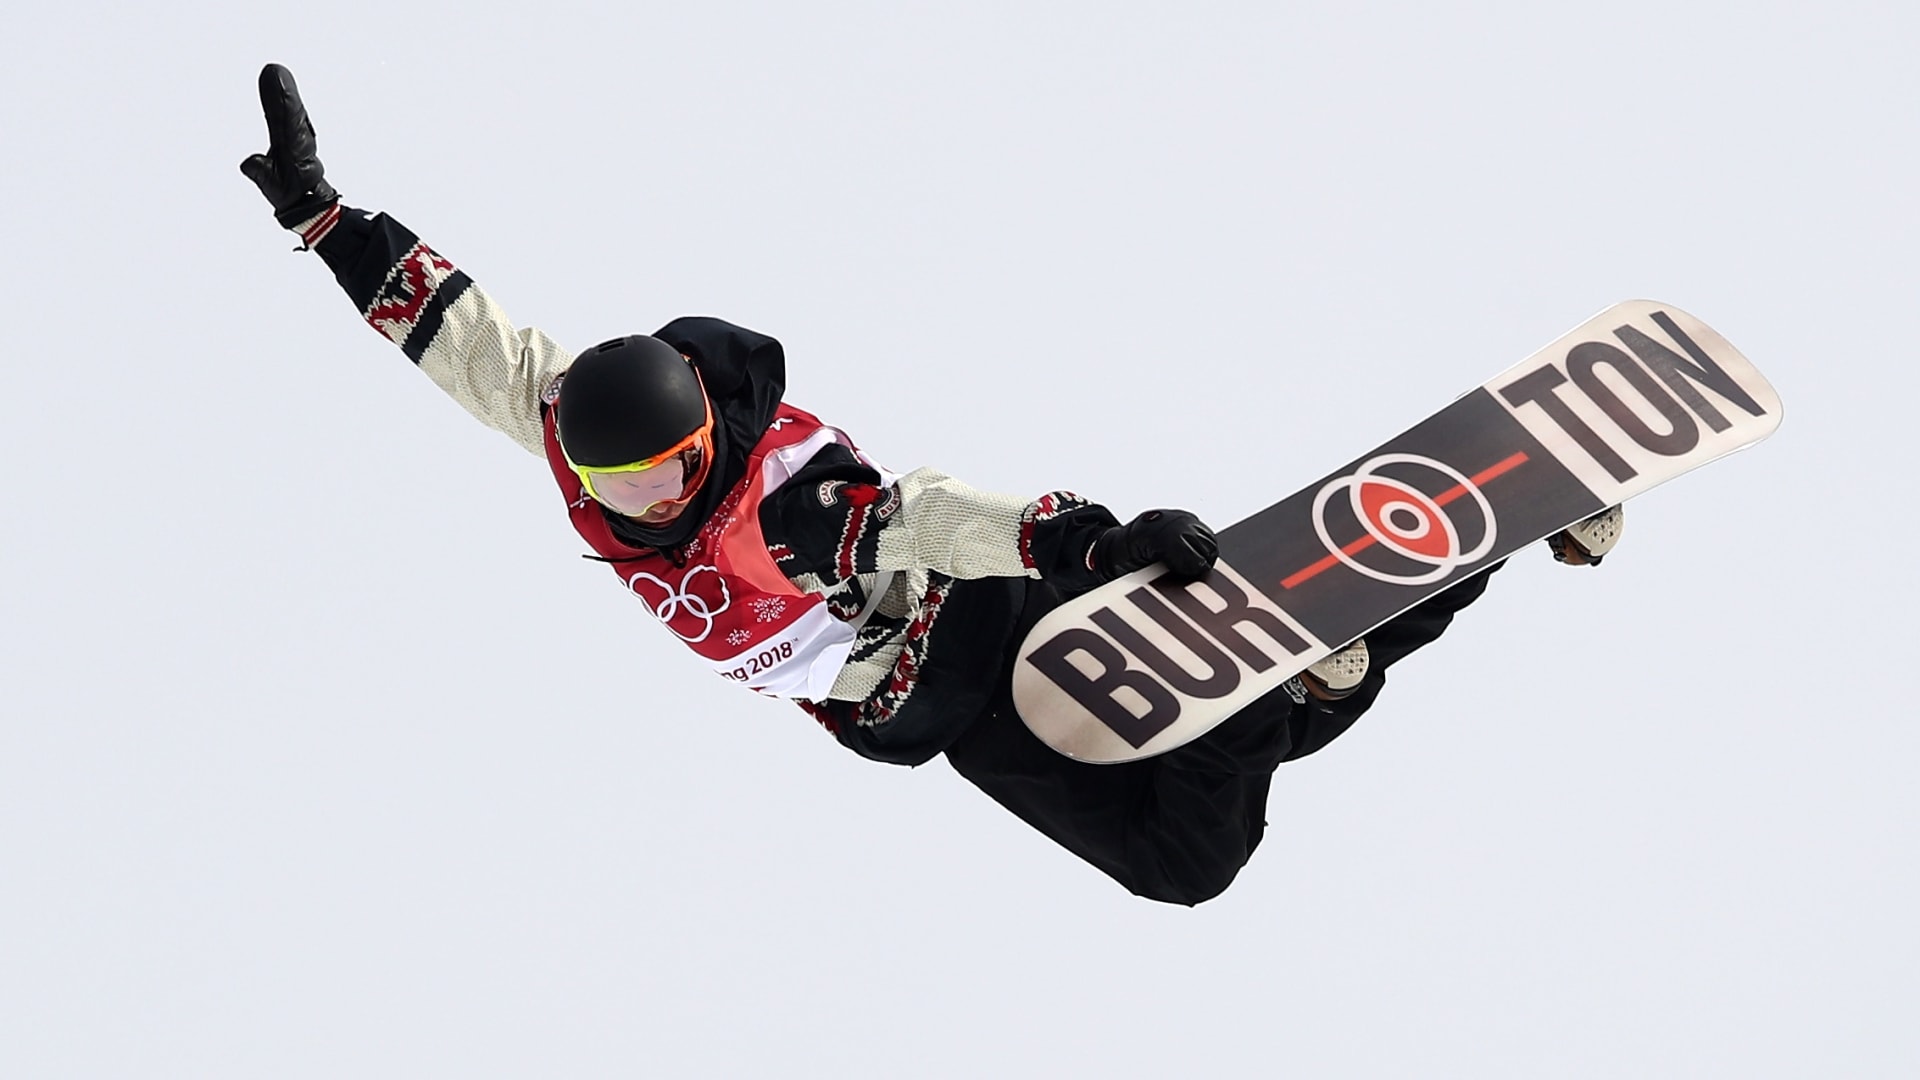 Who to watch in Big Air Snowboarding this season 1920x1080